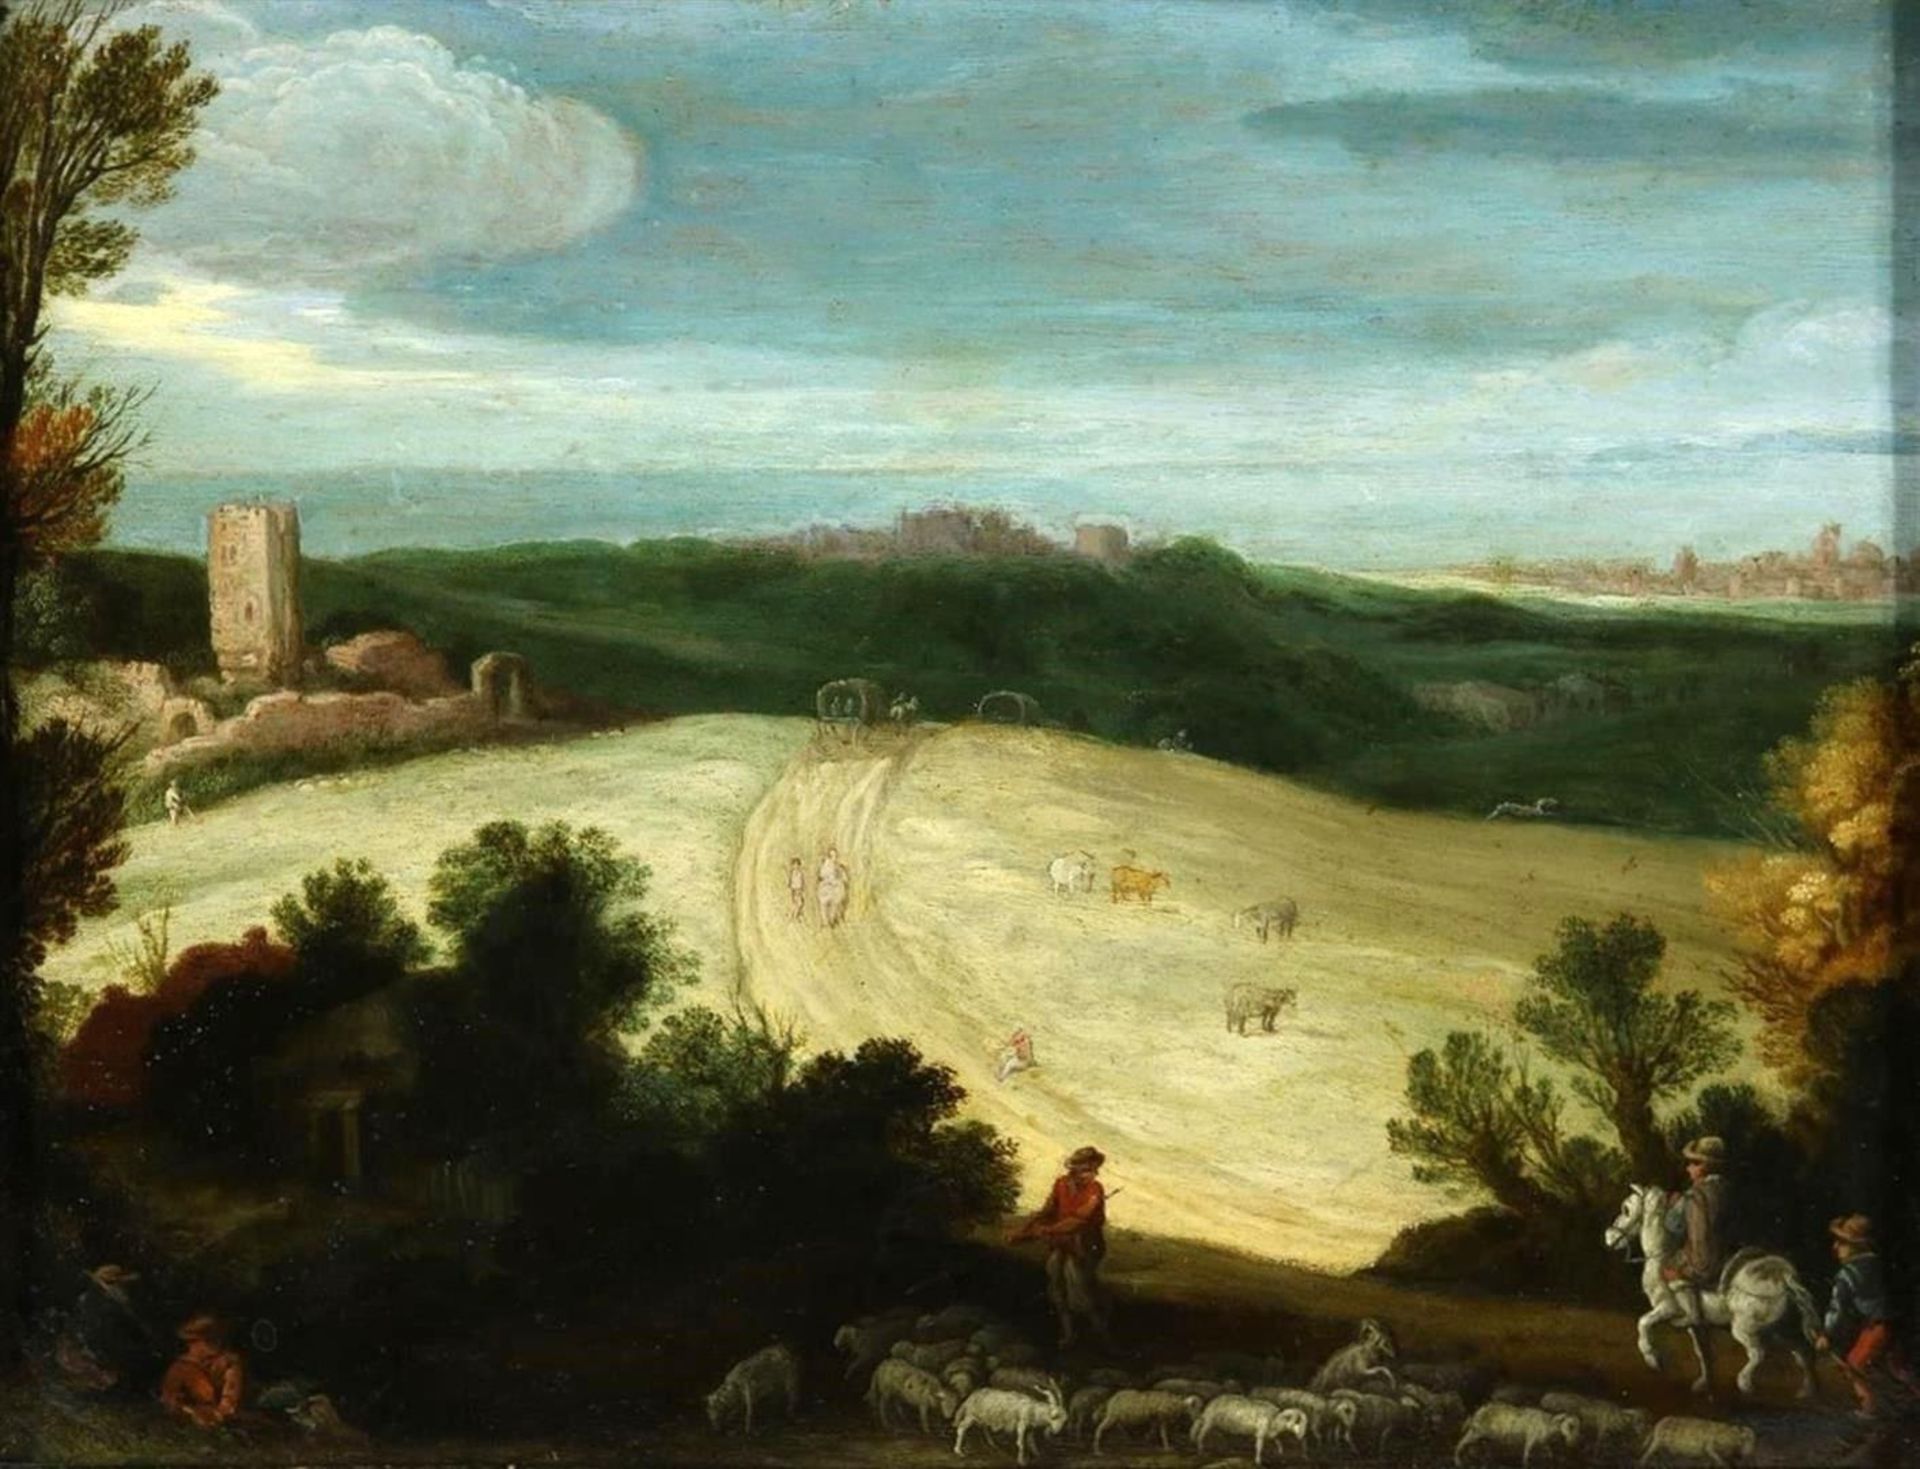 Atelier Paul Bril (1554-1626) Atelier Paul Bril (ca.1620) "Landscape with herds, travelers and